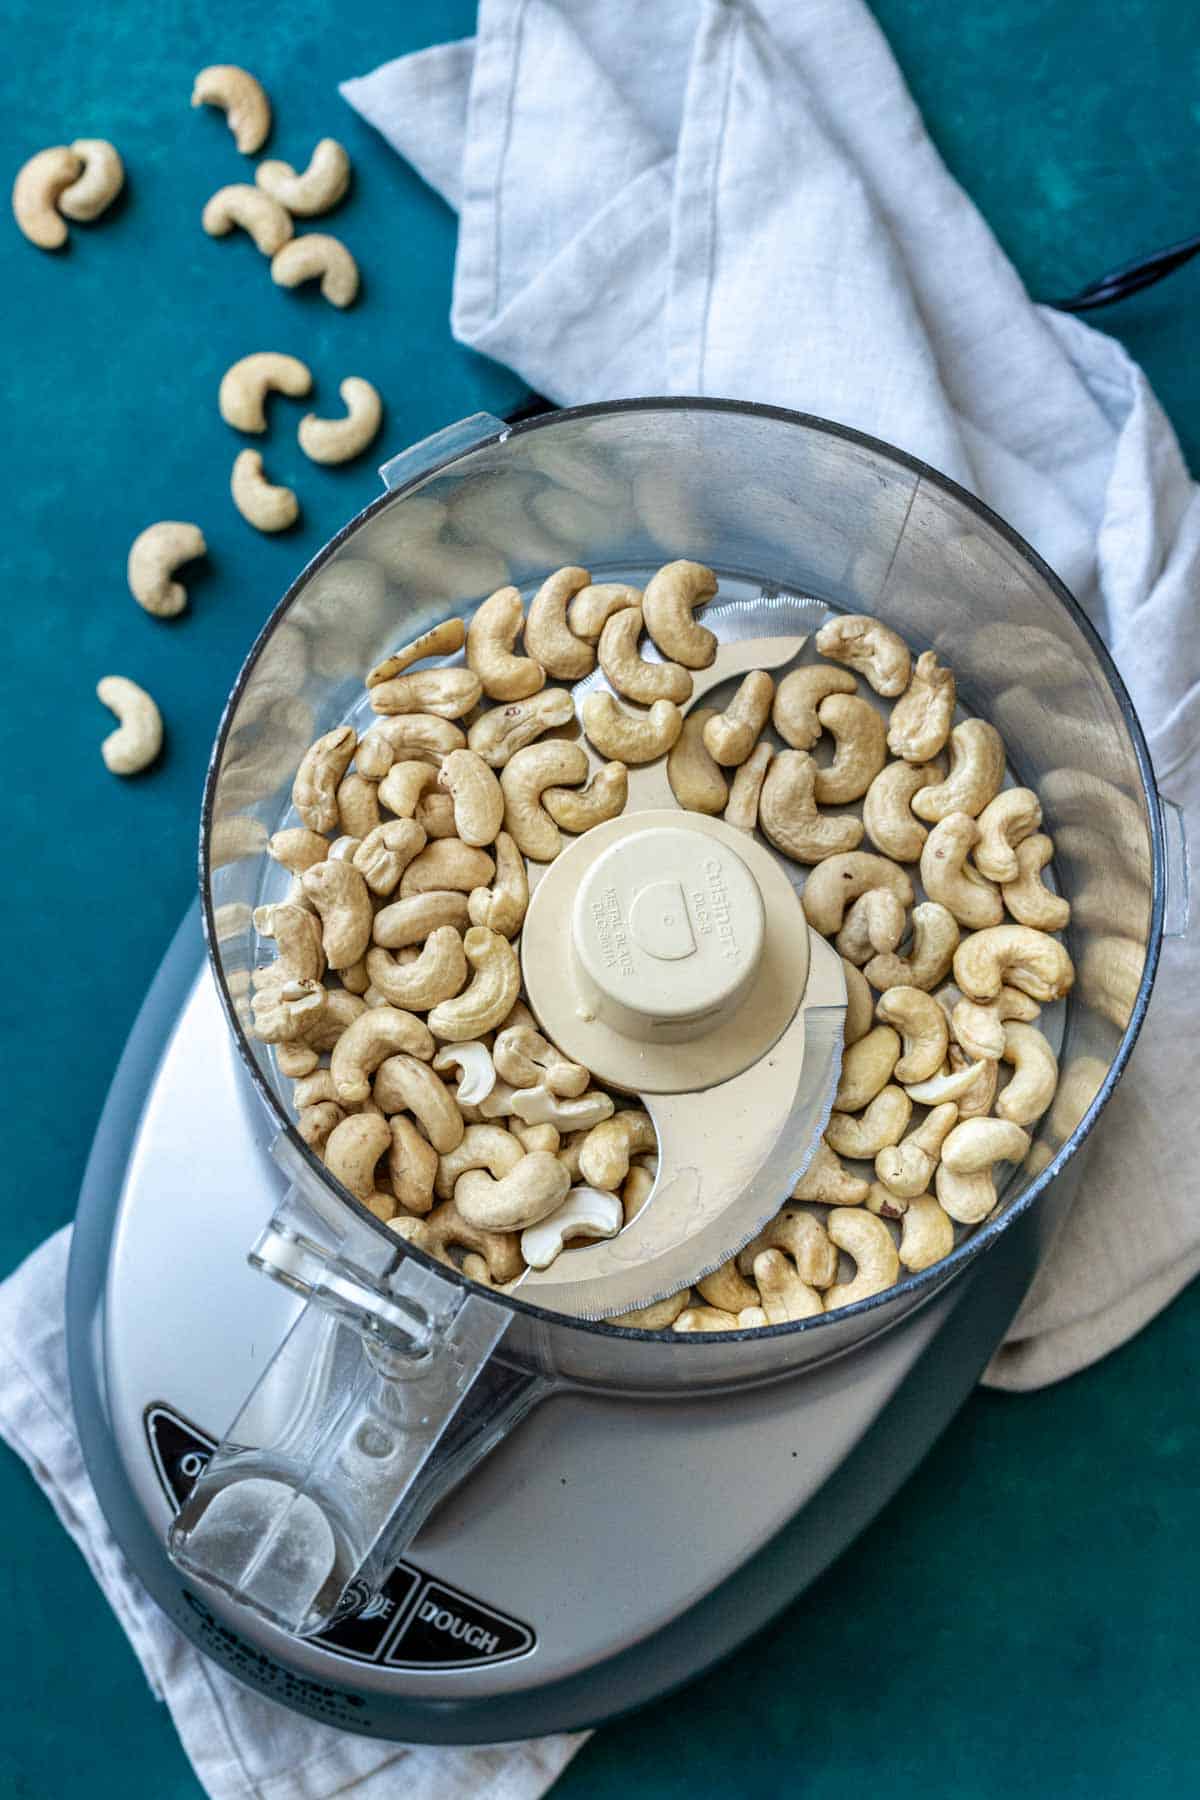 Top of a food processor with whole cashews inside sitting on a white towel.